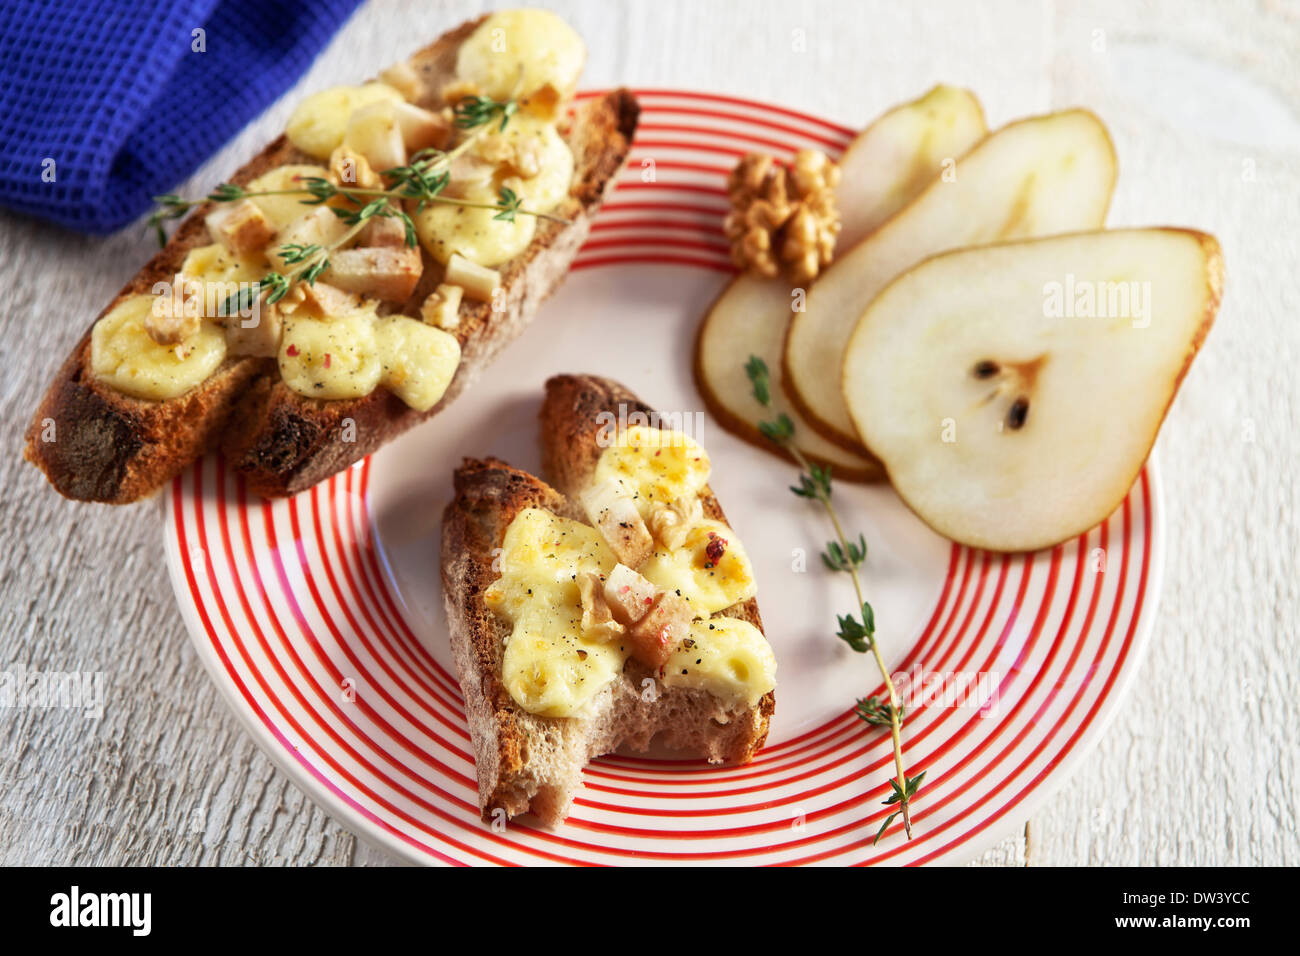 French bread with brie and pears Stock Photo